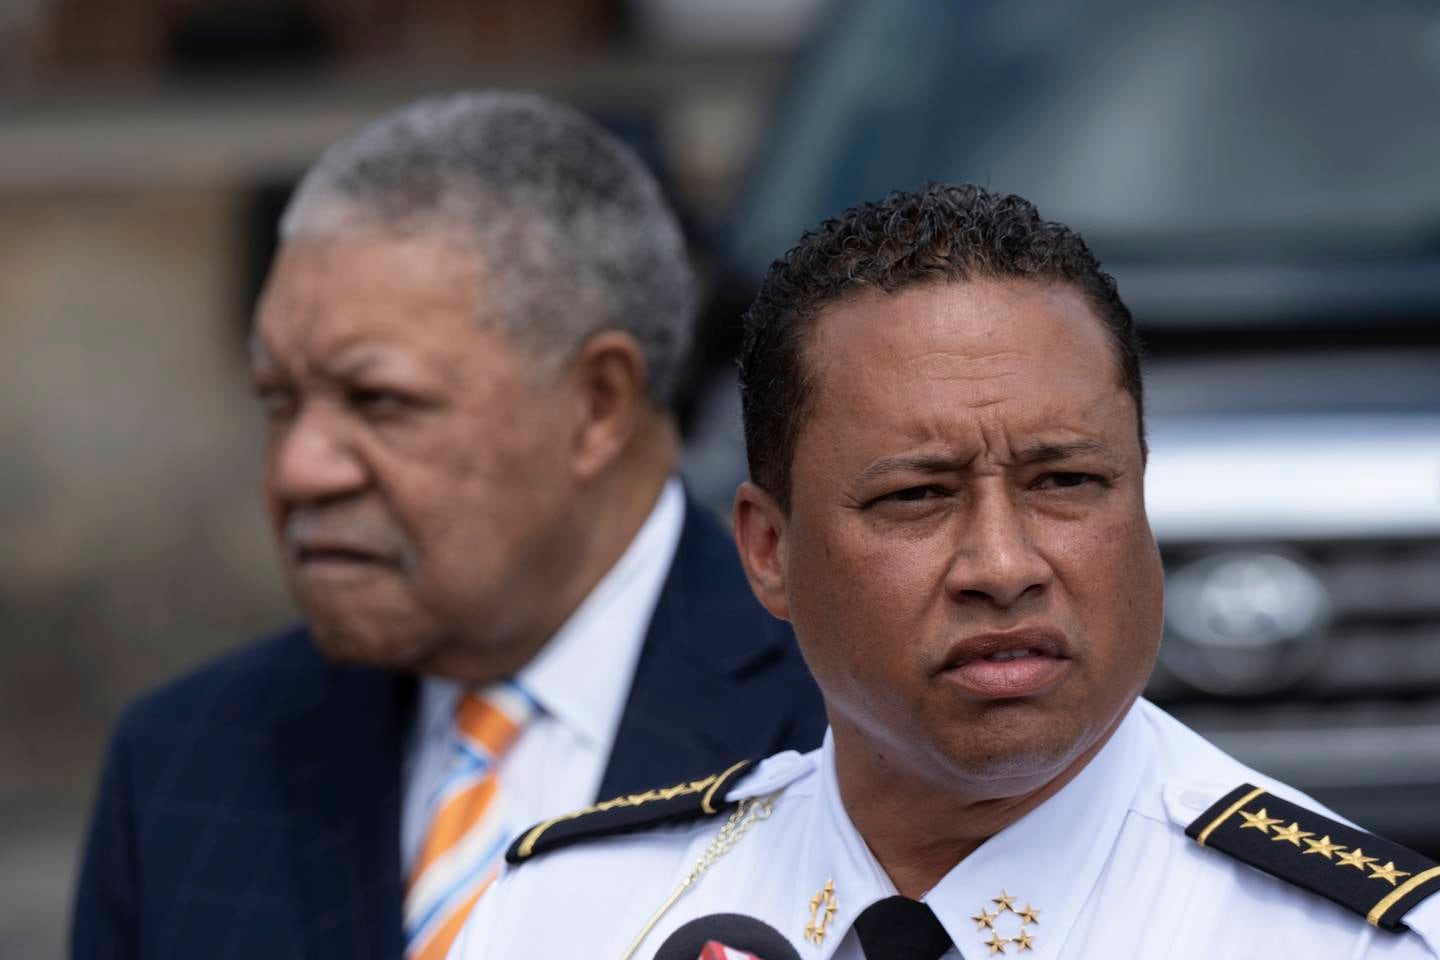 Fulton County Sheriff Patrick Labat, center, speaks to the media Tuesday afternoon, June 1, 2021 in Atlanta. (AP Photo/Ben Gray)